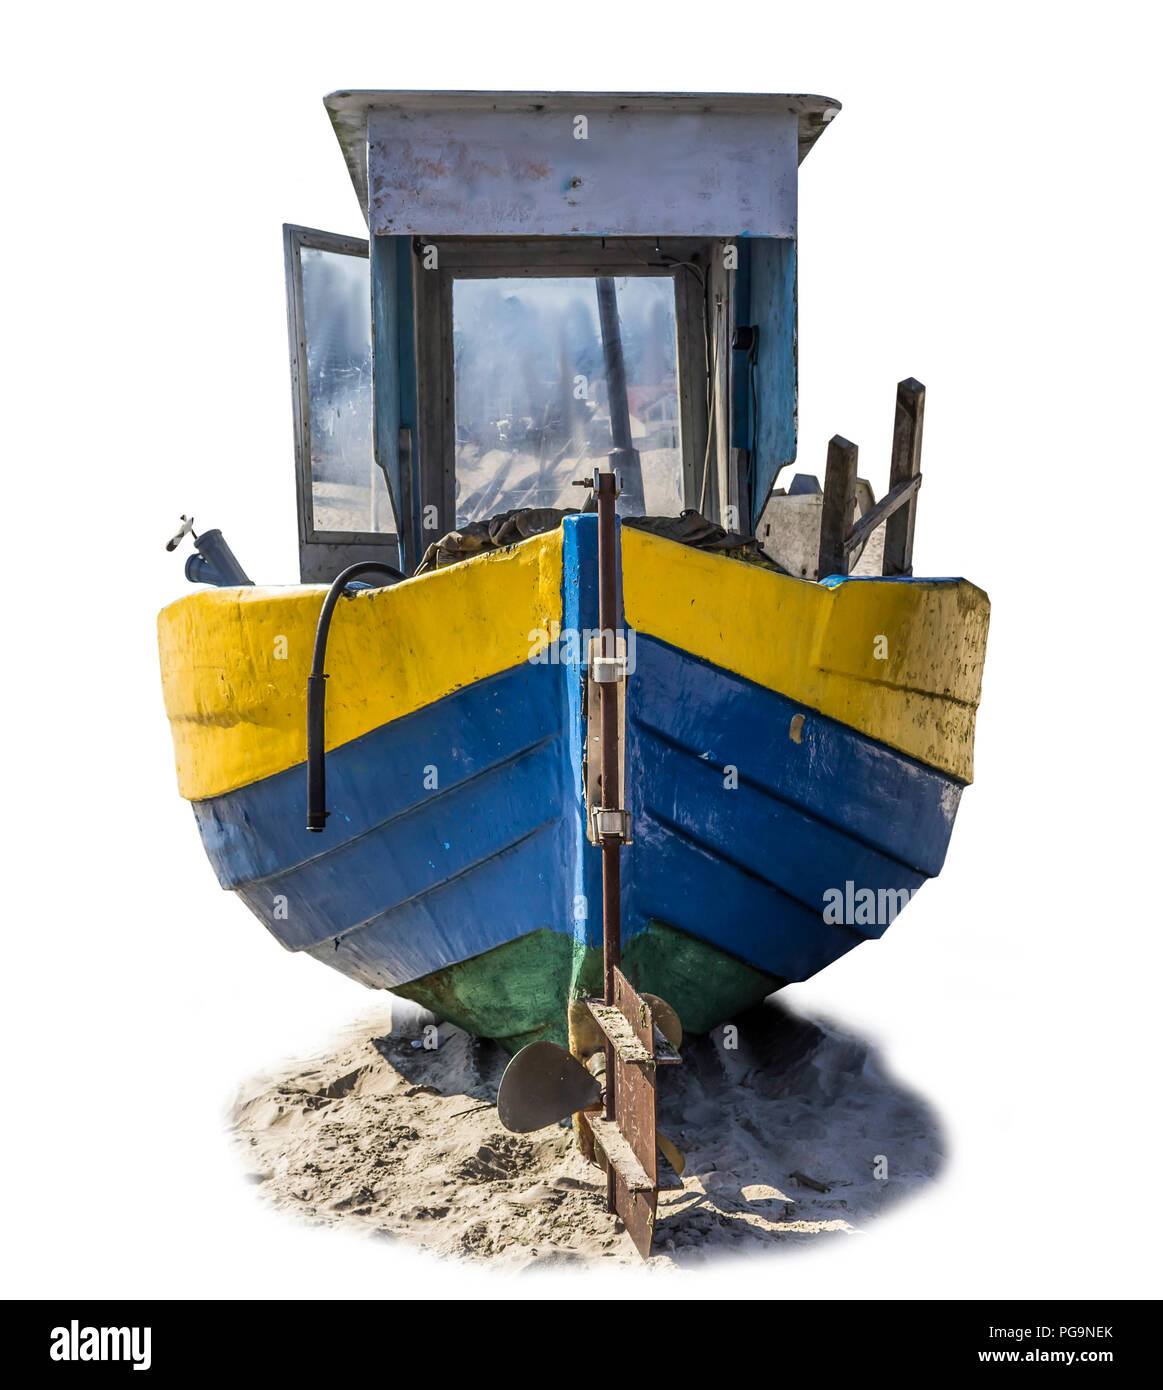 Baltic Sea .Old wooden fishing launch dragged ashore. Isolated photo. Site about the sea, fishing industry, fishermen, shipbuilding , timber ,romance. Stock Photo